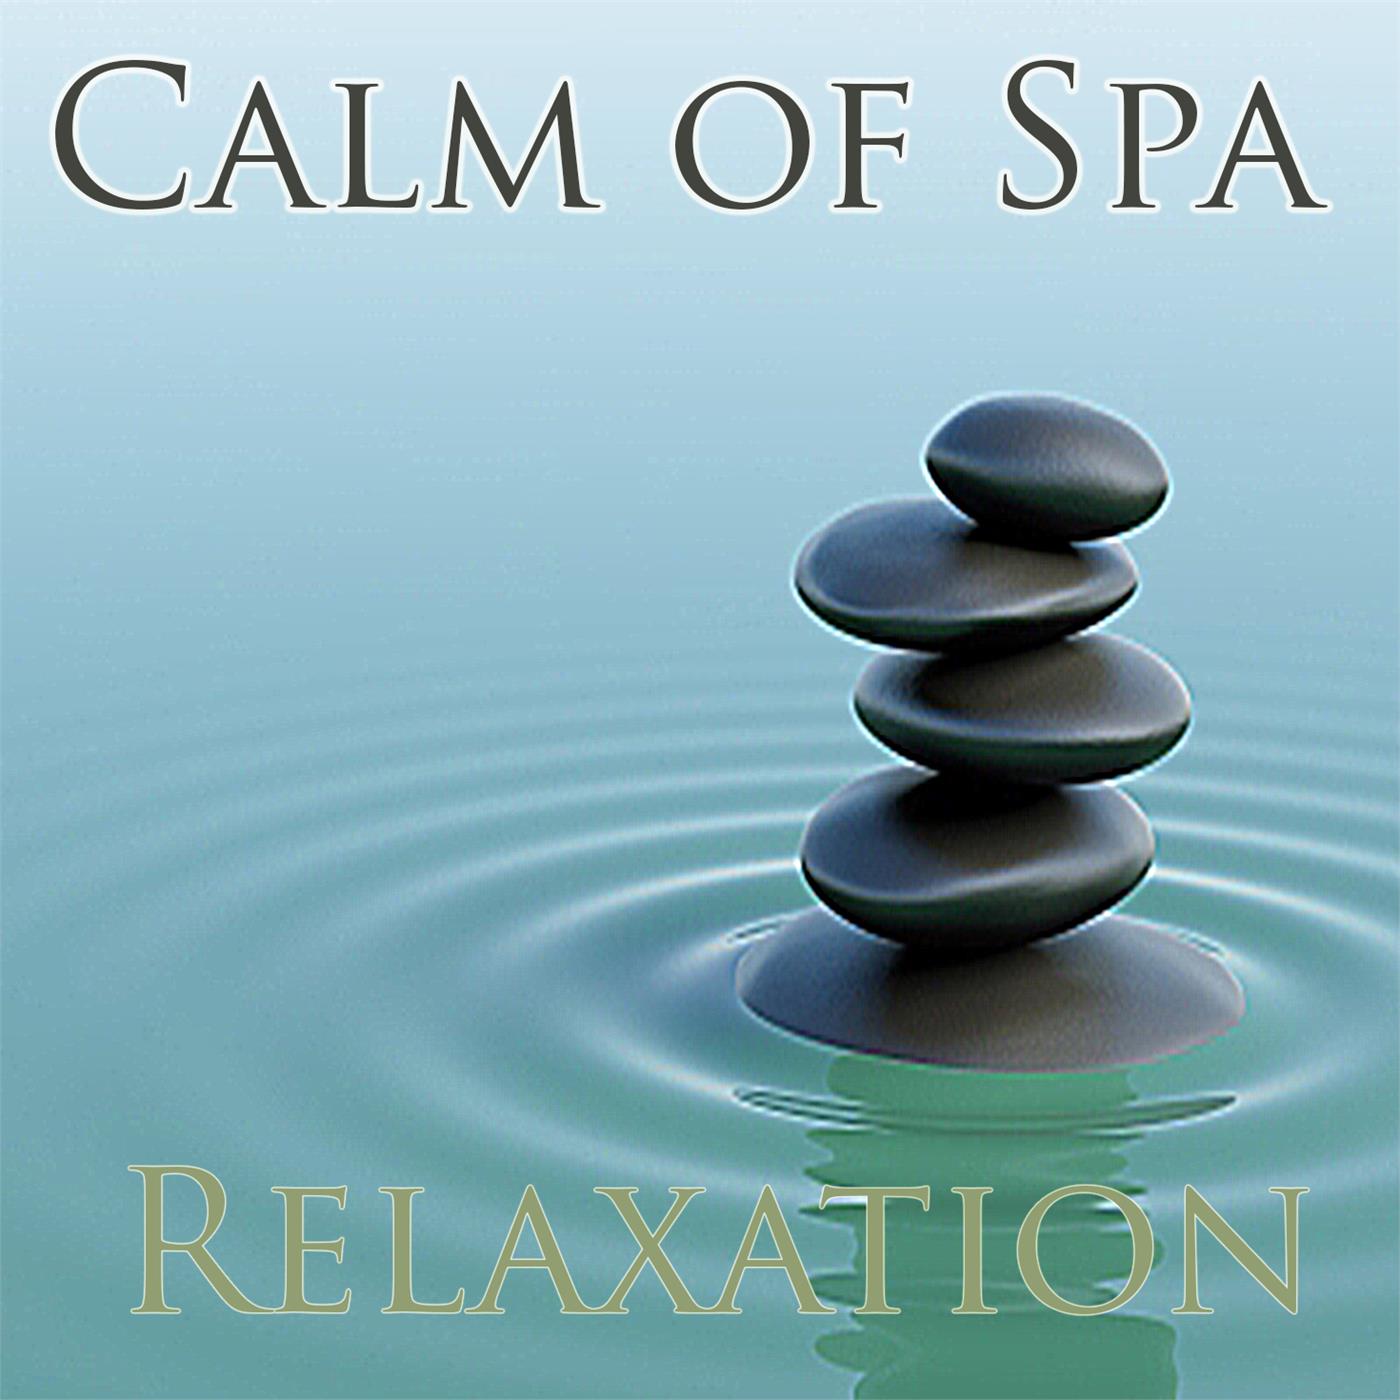 Calm of Spa Relaxation